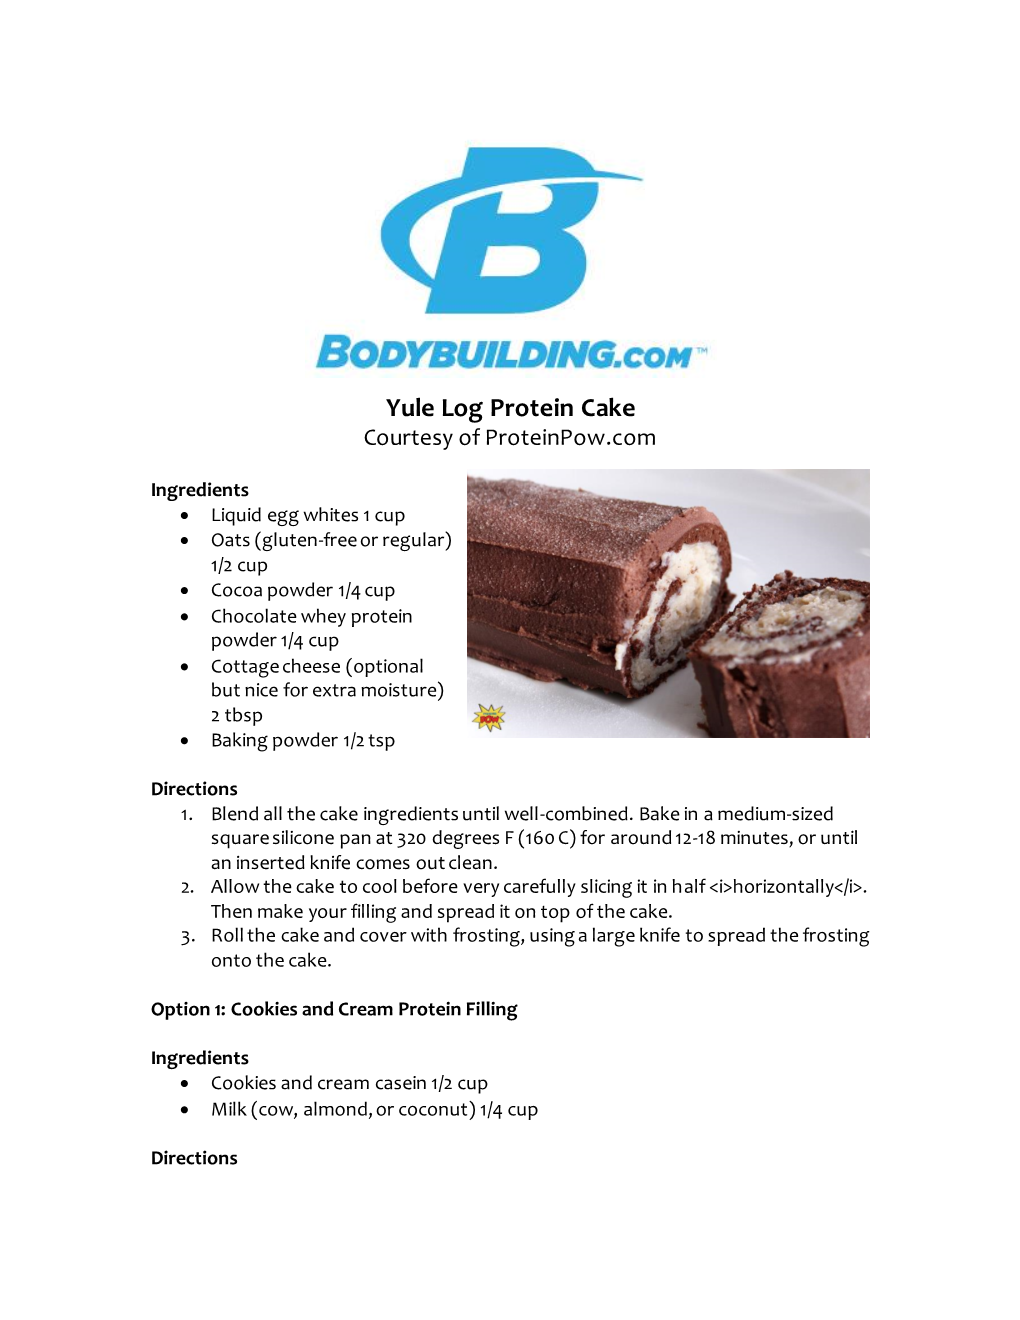 Yule Log Protein Cake Courtesy of Proteinpow.Com